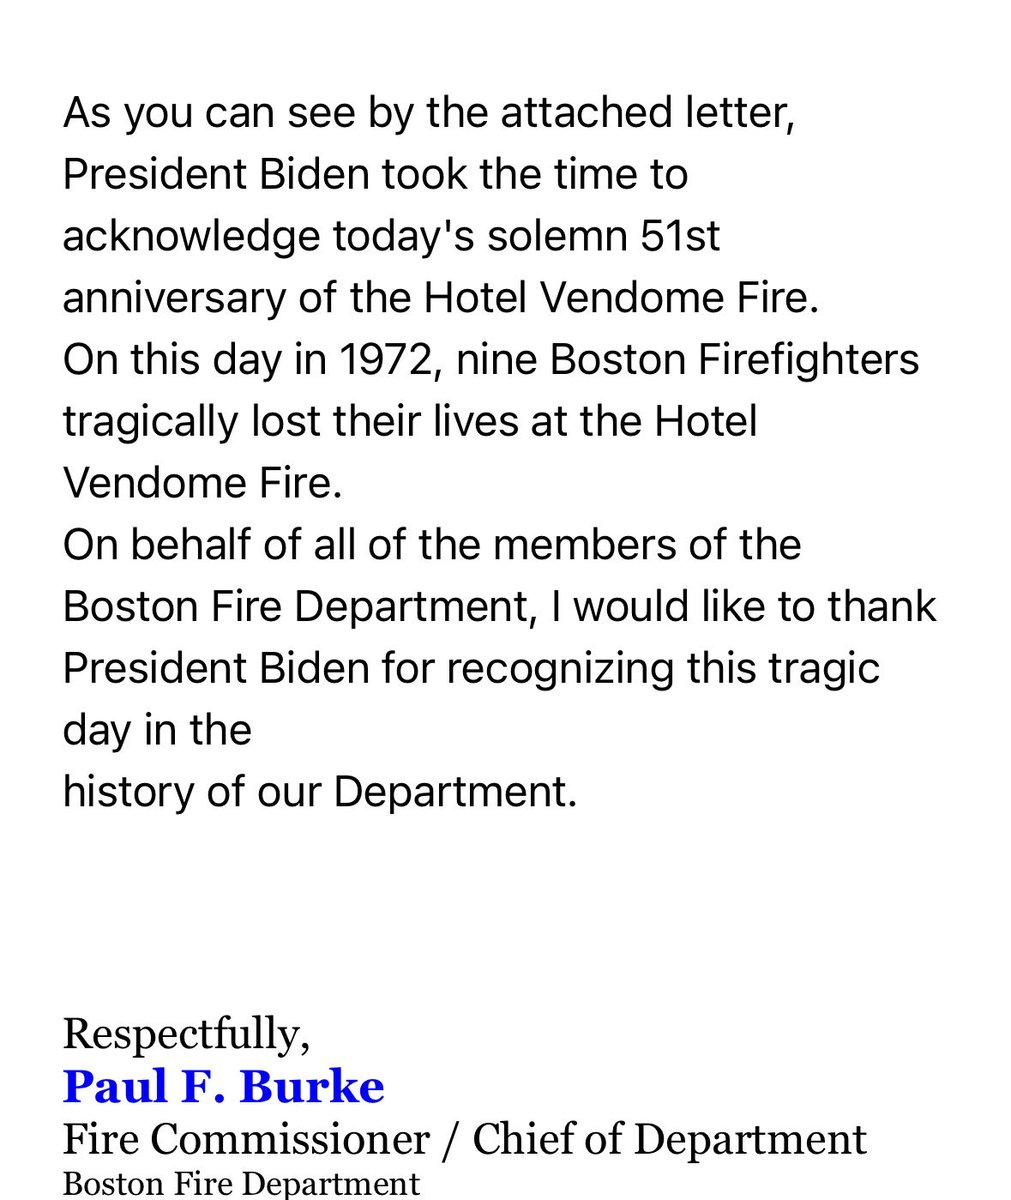 A Special  acknowledgement for the 51st anniversary of the Hotel Vendome  Fire